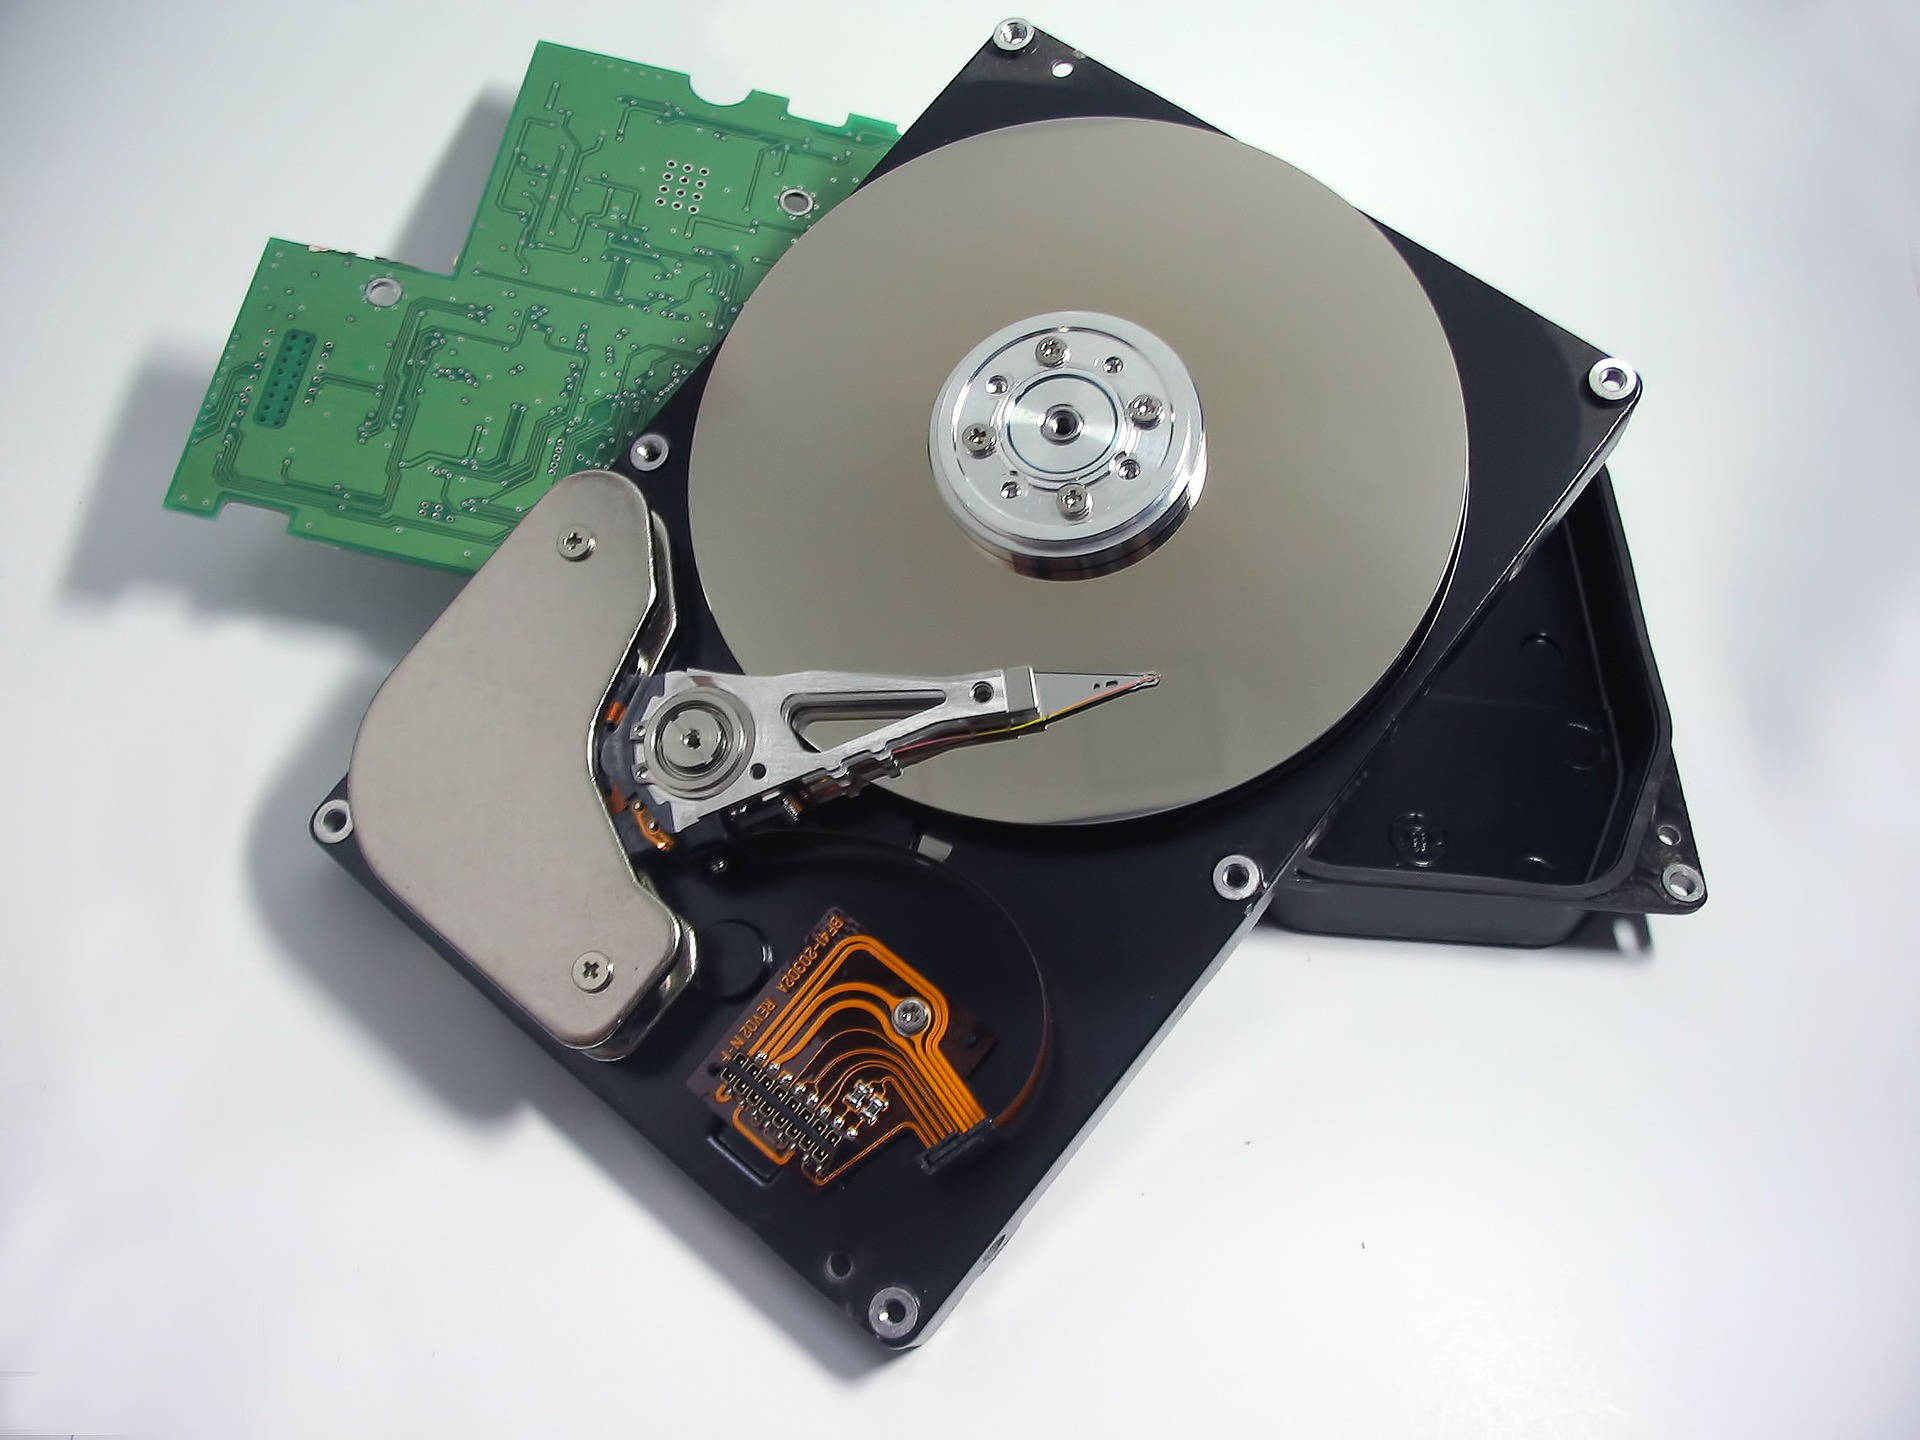 Disassembled Hard Drive from a Top View Perspective. Wallpaper